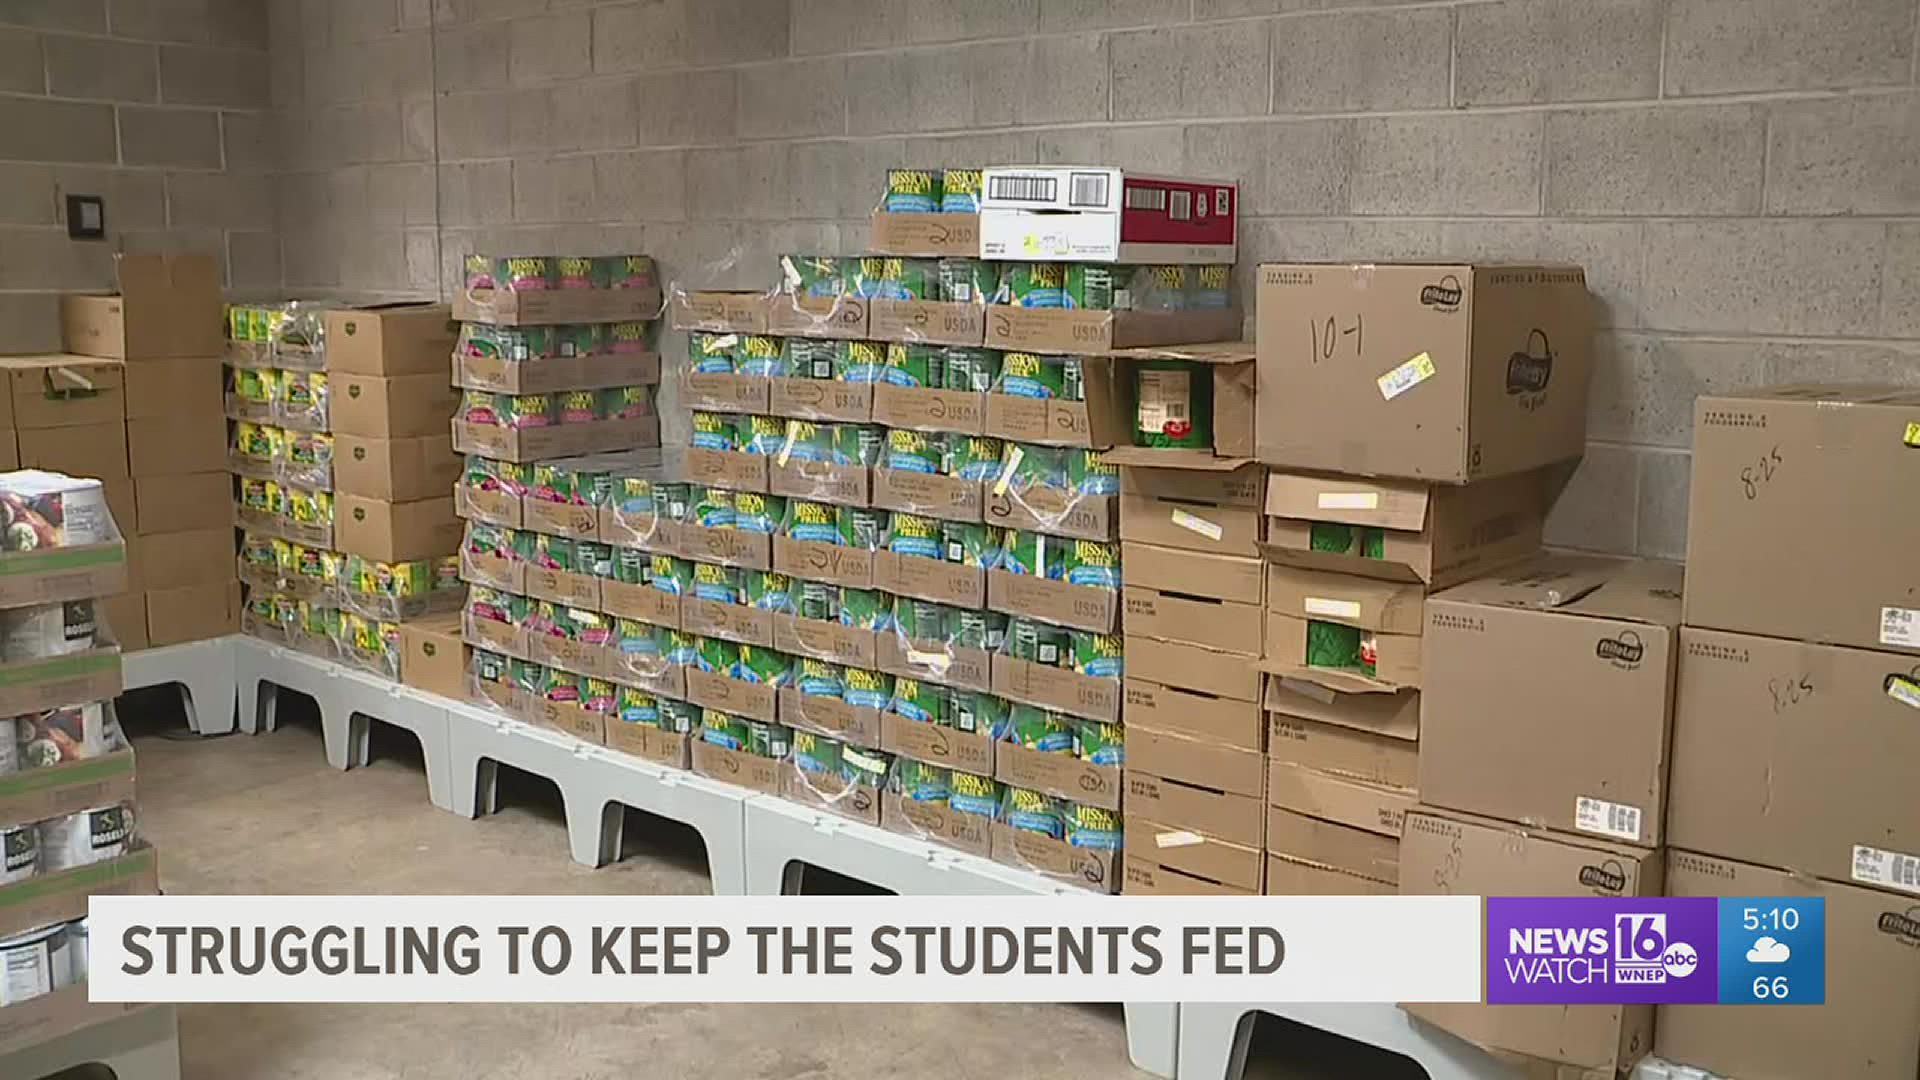 Worker shortages all along the school food supply chain are causing problems for at least one district in Luzerne County.